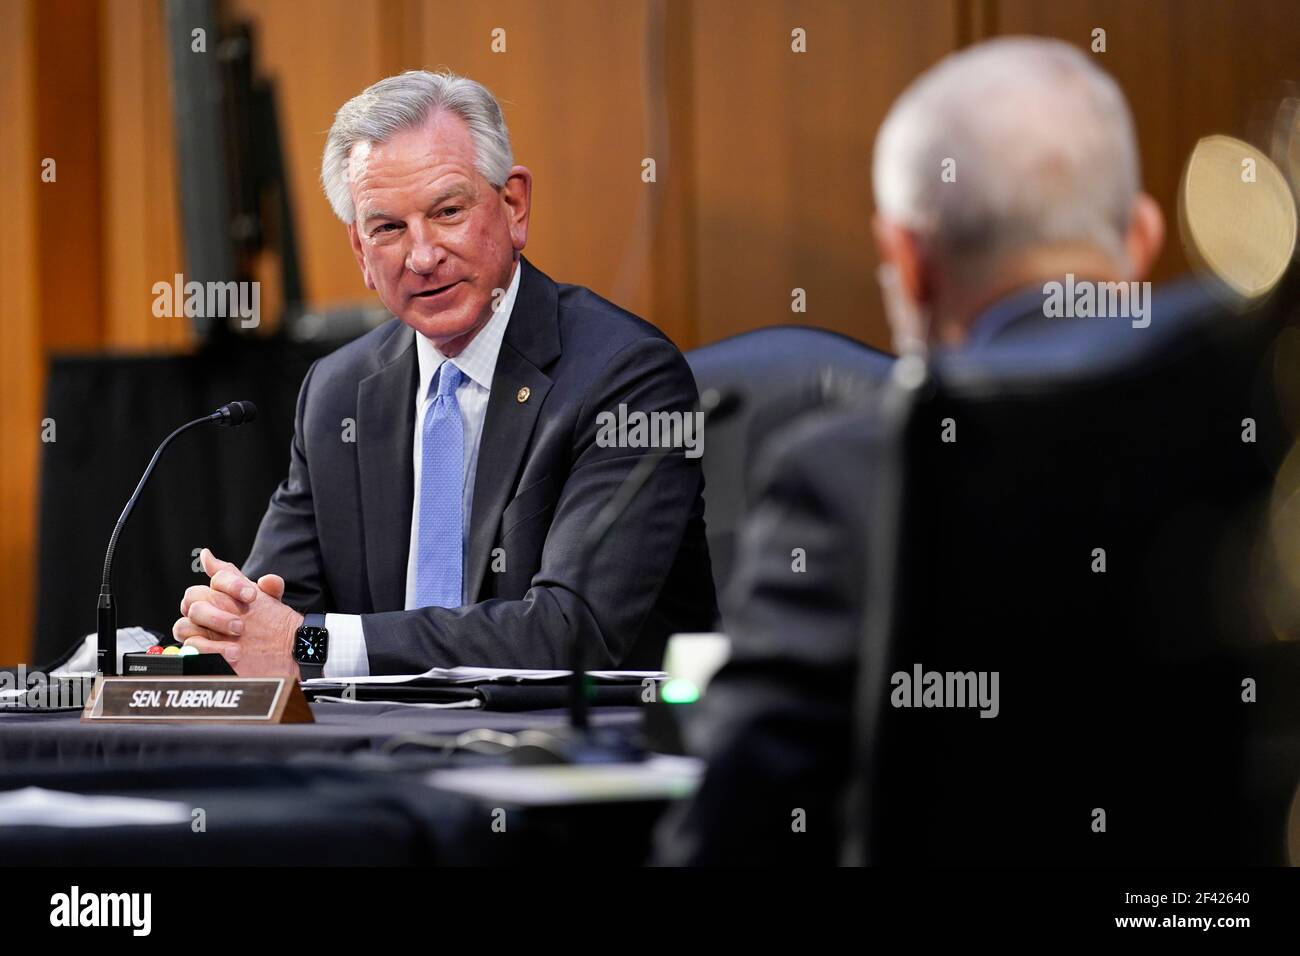 Washington, United States Of America. 18th Mar, 2021. United States Senator Tommy Tuberville (Republican of Alabama), speaks during a Senate Health, Education, Labor and Pensions Committee hearing on the federal coronavirus response on Capitol Hill in Washington, Thursday, March 18, 2021.Credit: Susan Walsh/Pool via CNP | usage worldwide Credit: dpa/Alamy Live News Credit: dpa picture alliance/Alamy Live News Stock Photo